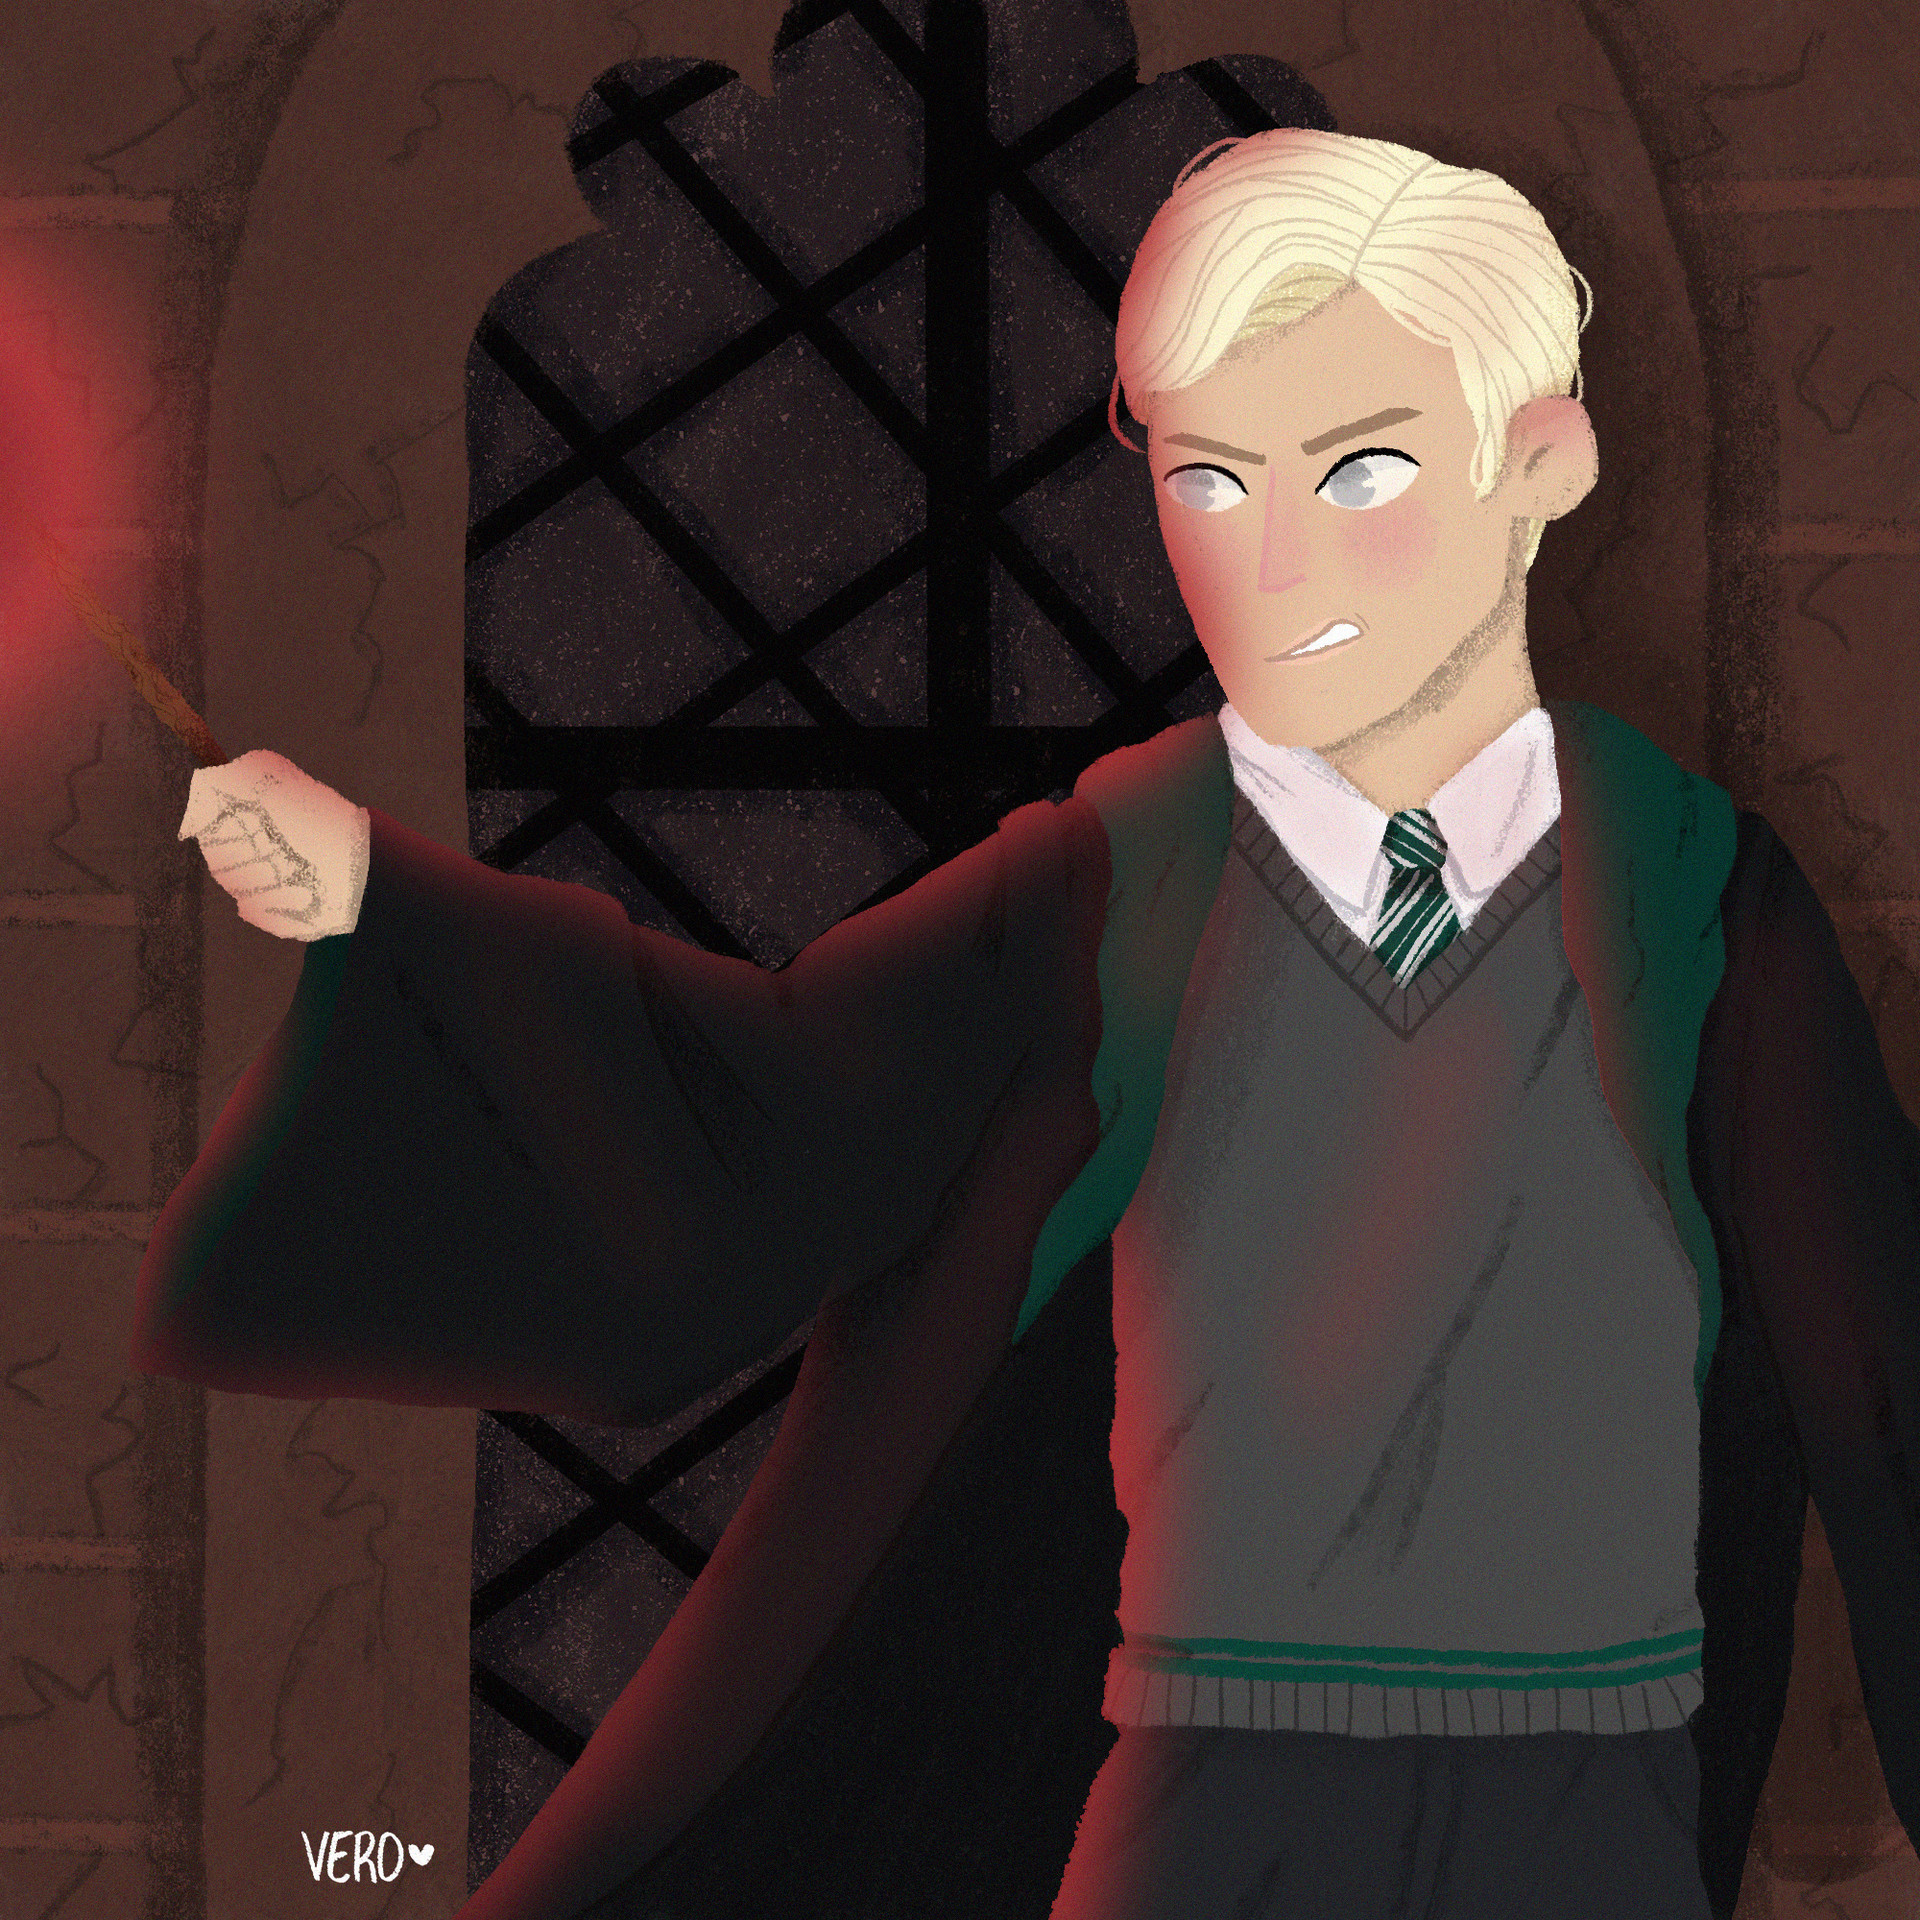 Draco Malfoy First Year (Harry Potter Fanart) by RisaFey on DeviantArt